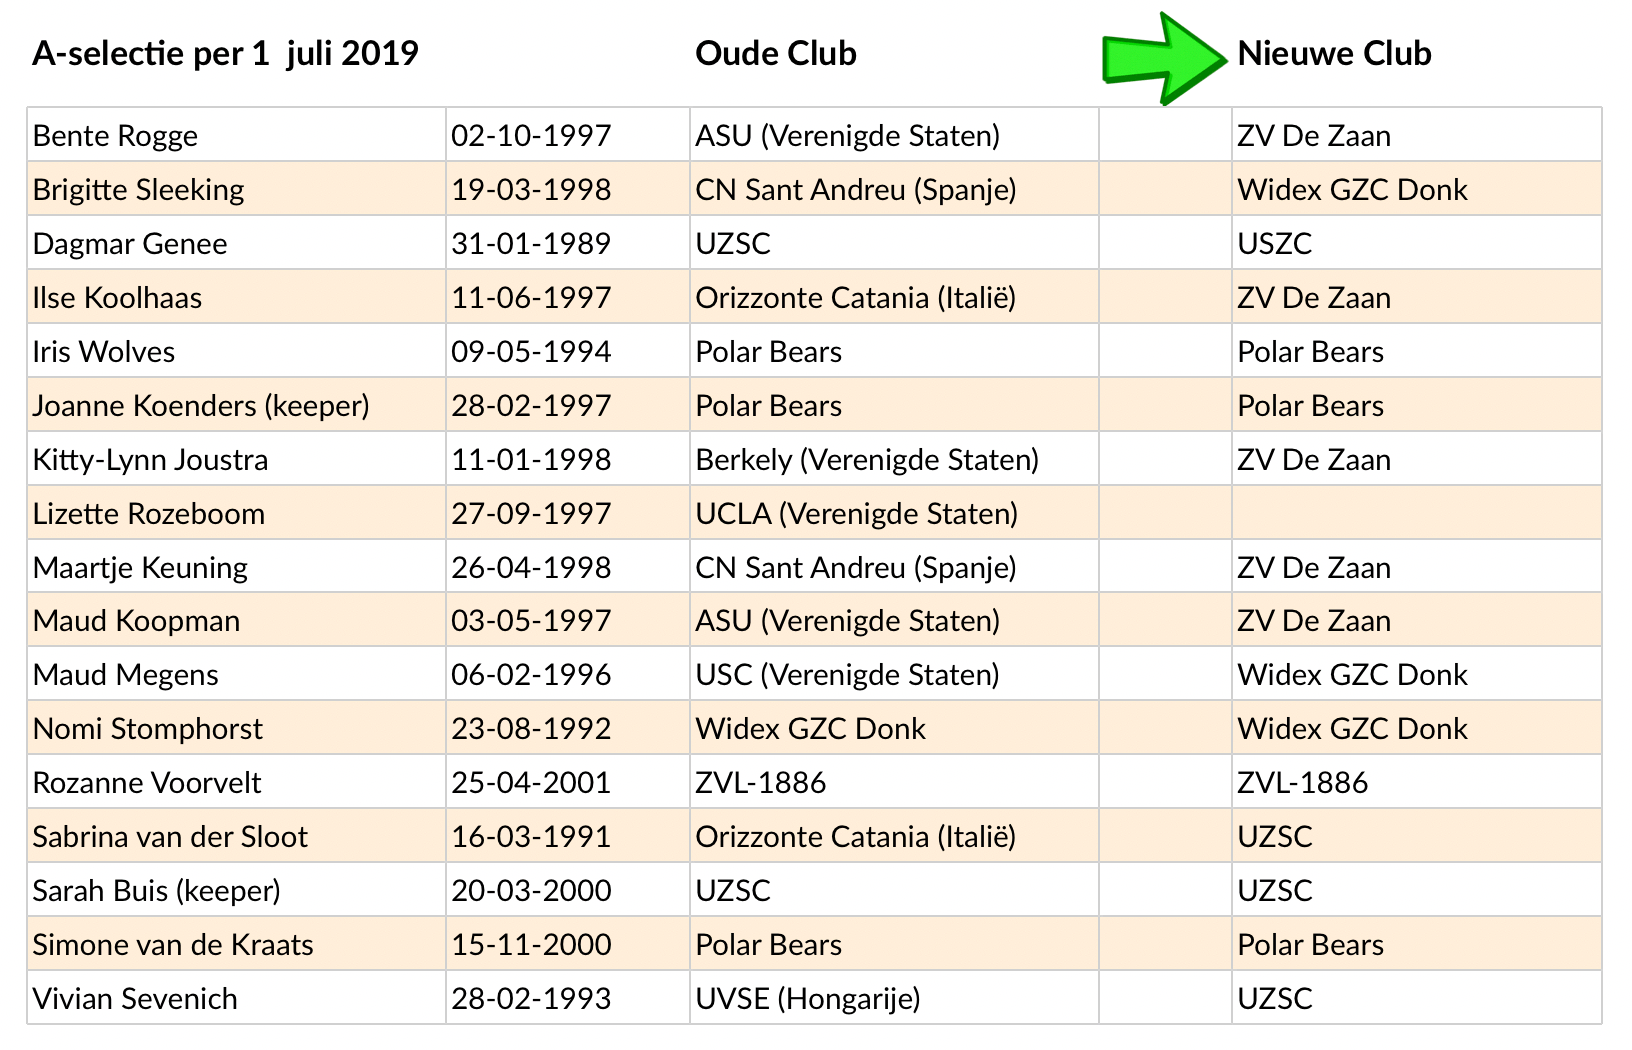 Dames%20A-selectie%20clubs.png